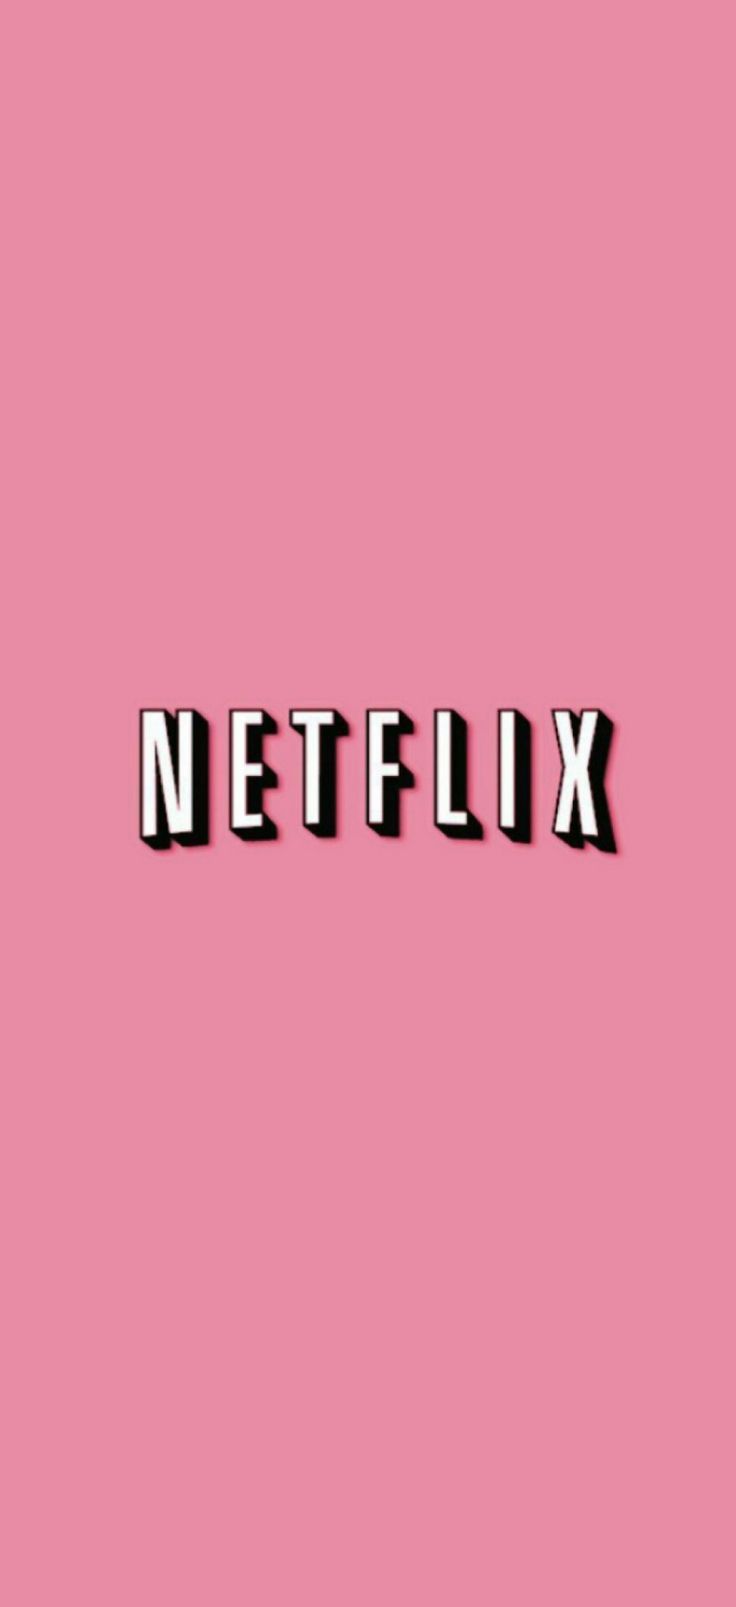 The logo for netflix is shown on a pink background - Netflix